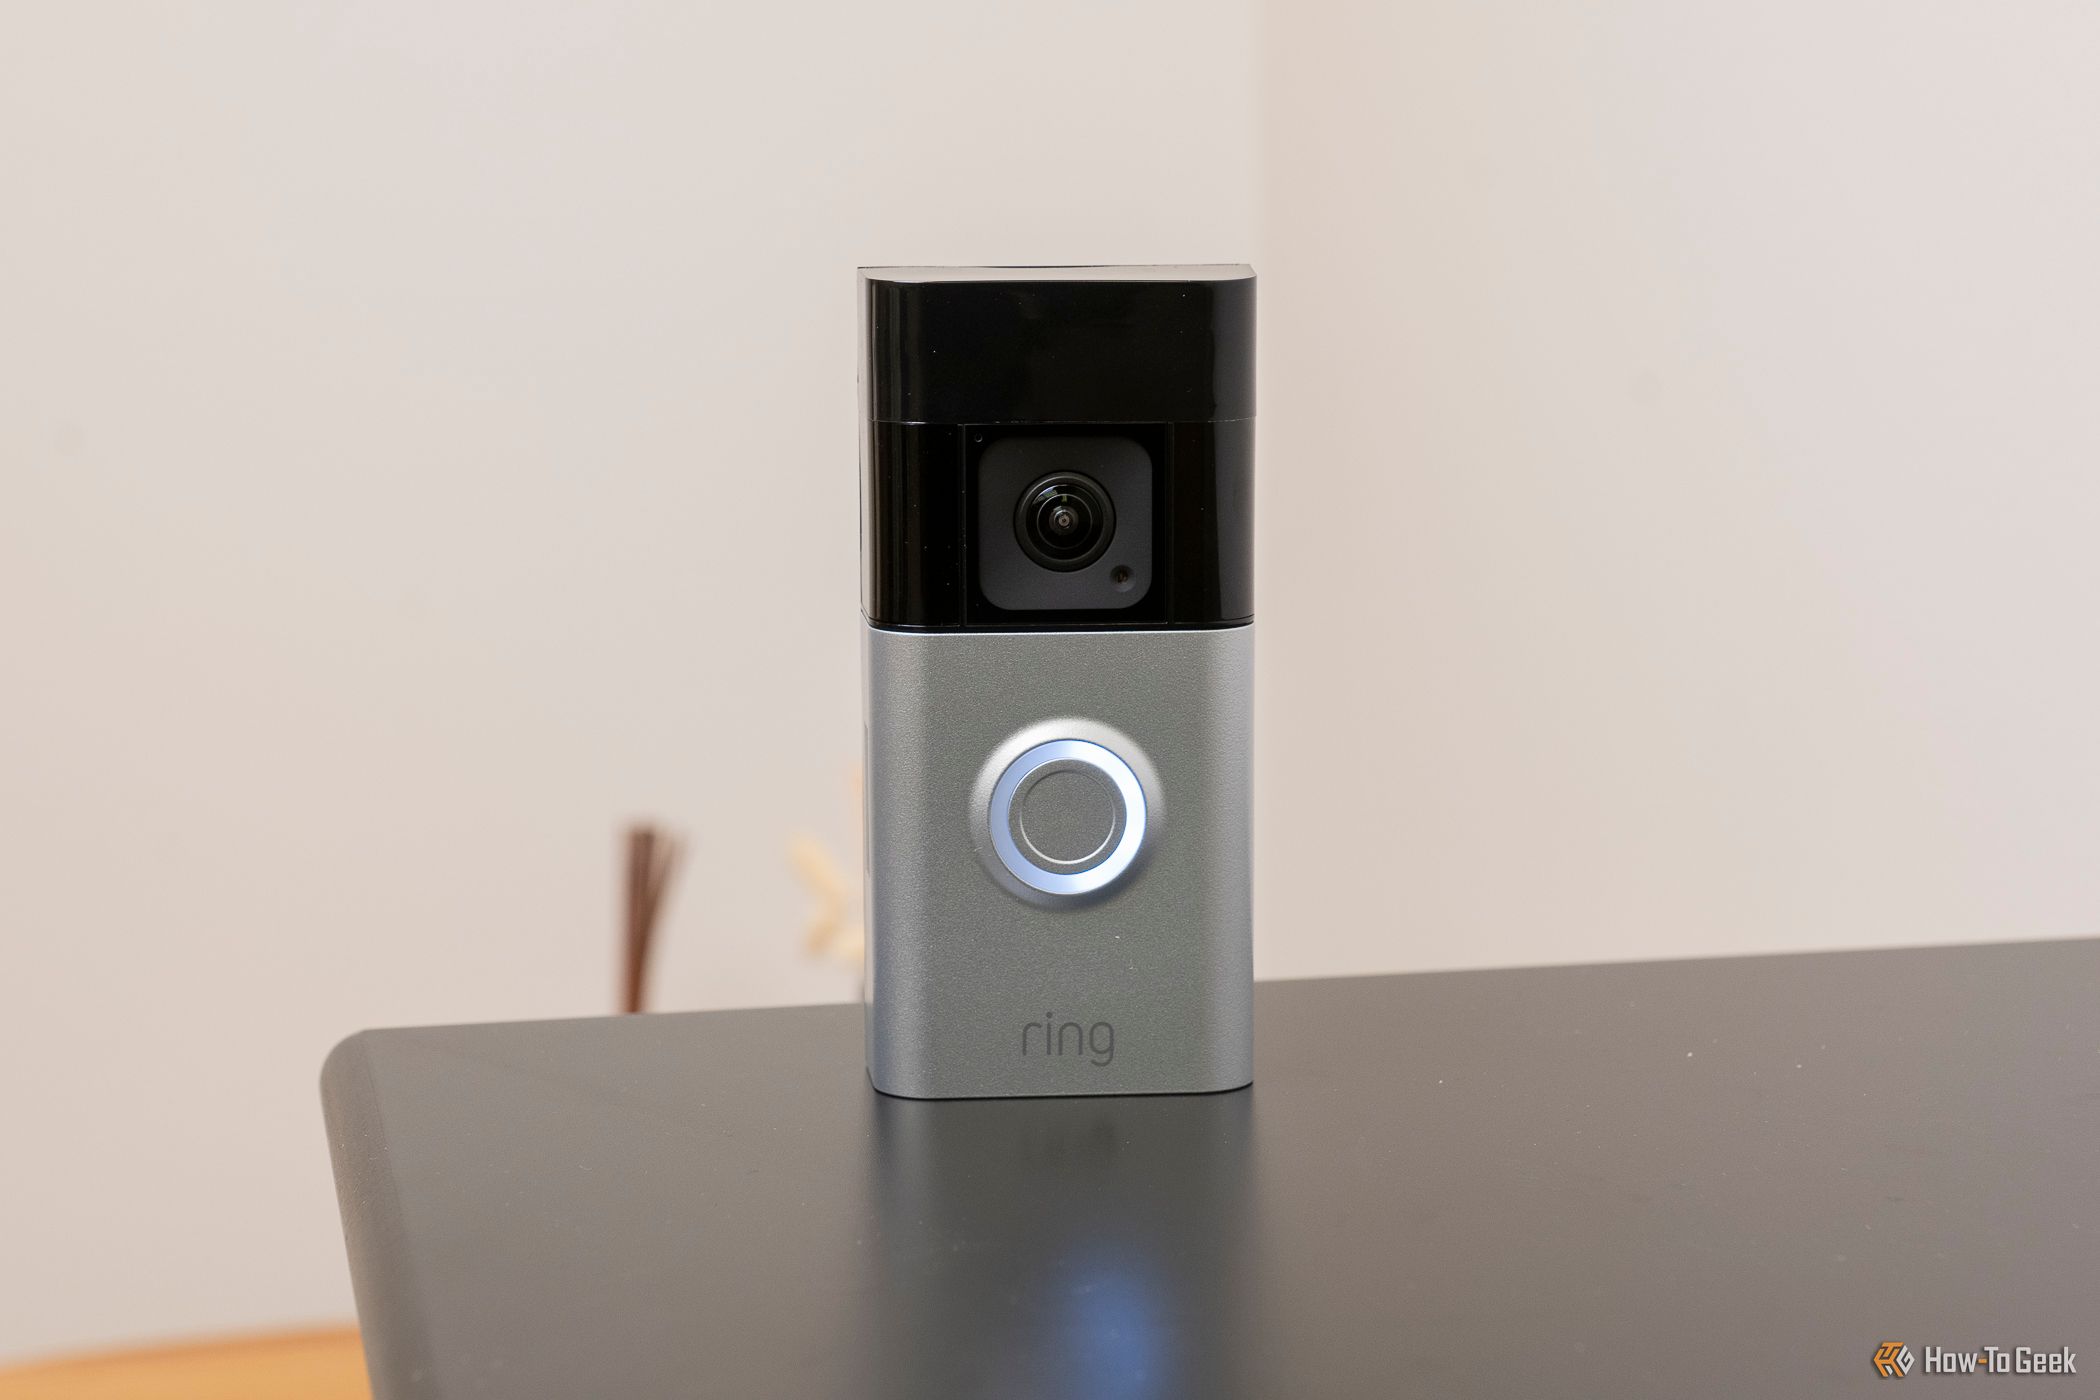 The Ring Battery Doorbell Pro turned on